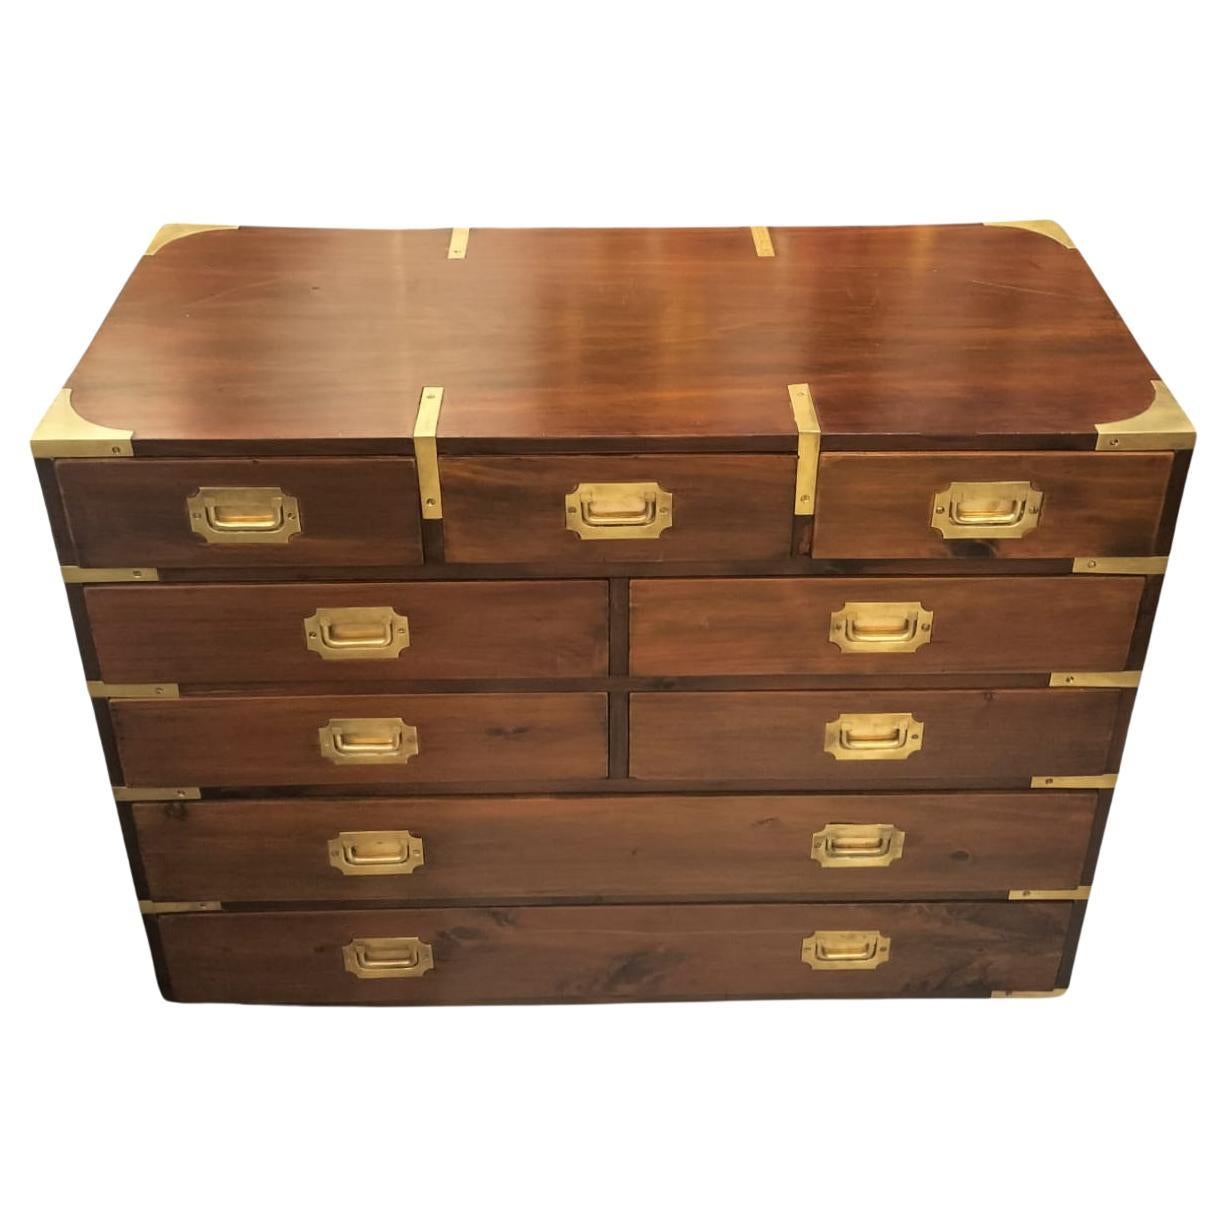 19th Century English Campaign Marine Chest of Drawers in Mahogany 